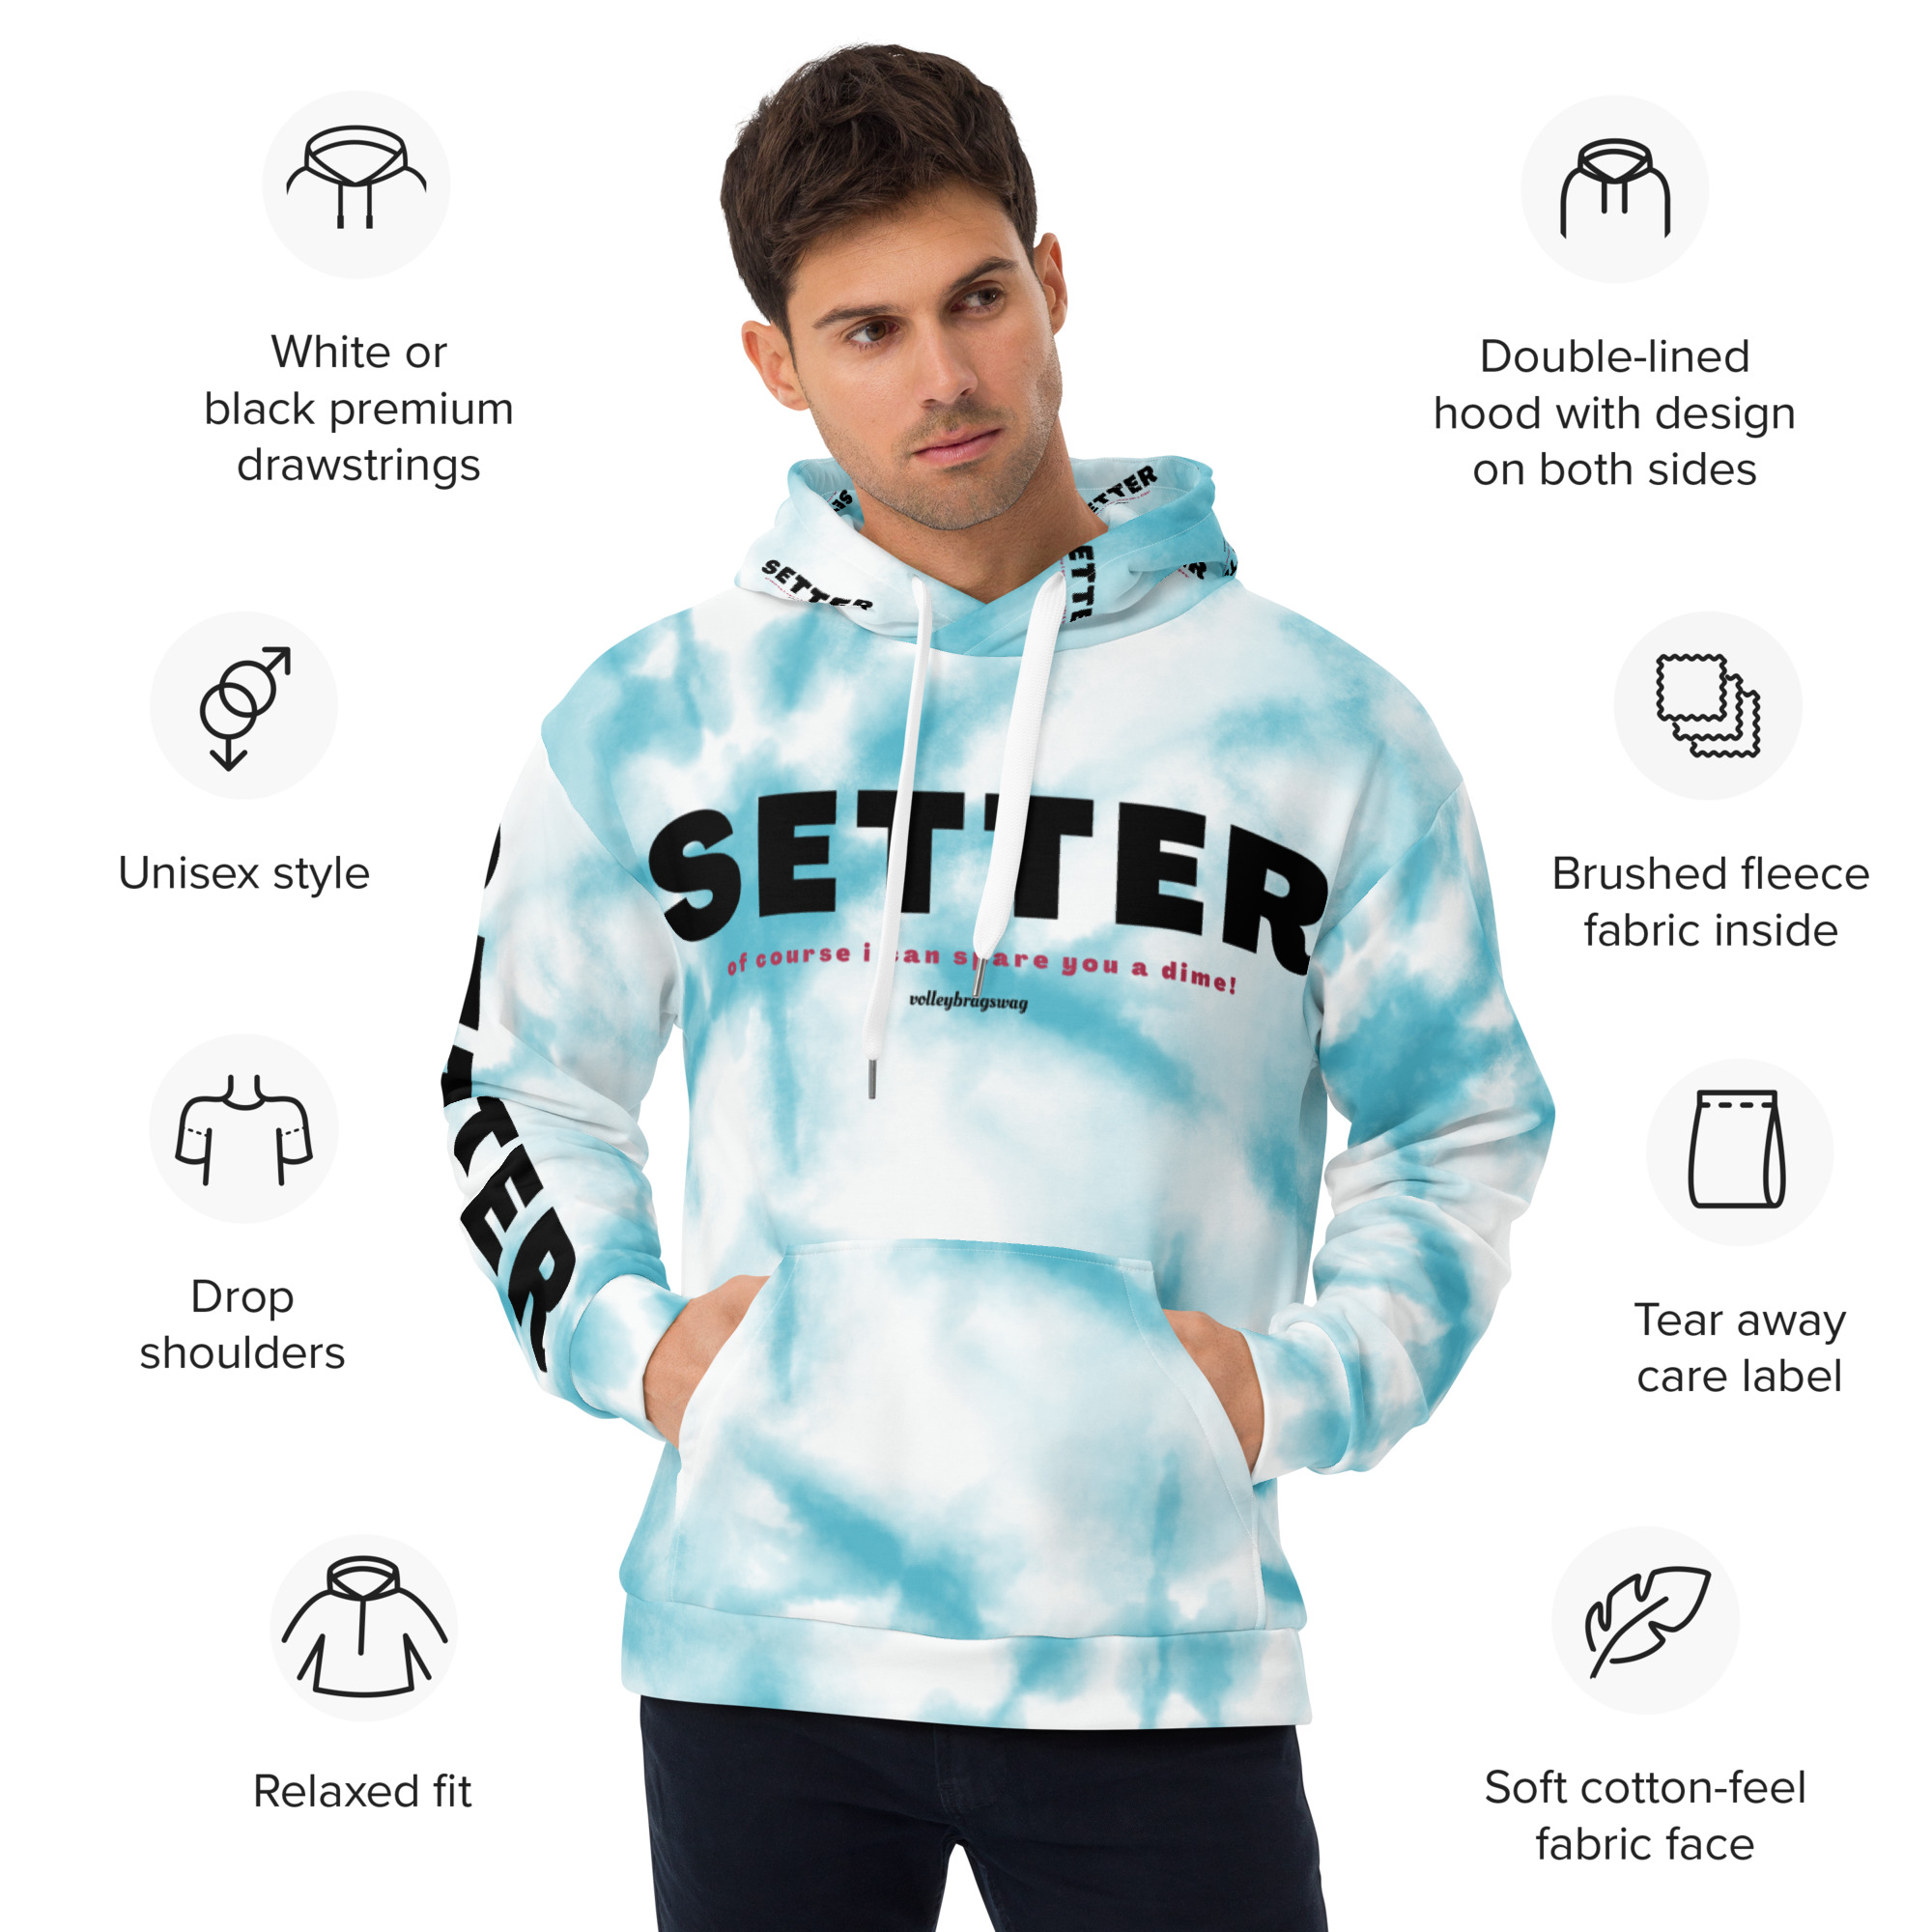 Blue and white tie dye hoodie Setter volleyball tshirt ideas. SETTER

Of Course I Can Spare You A Dime

Girls Blue Tie Dye Hoodie, Volleyball Hand Signals For Setters, Tie Dye Hoodie, Blue Tie Dye Hoodie, Volleyball Team Hoodie Designs